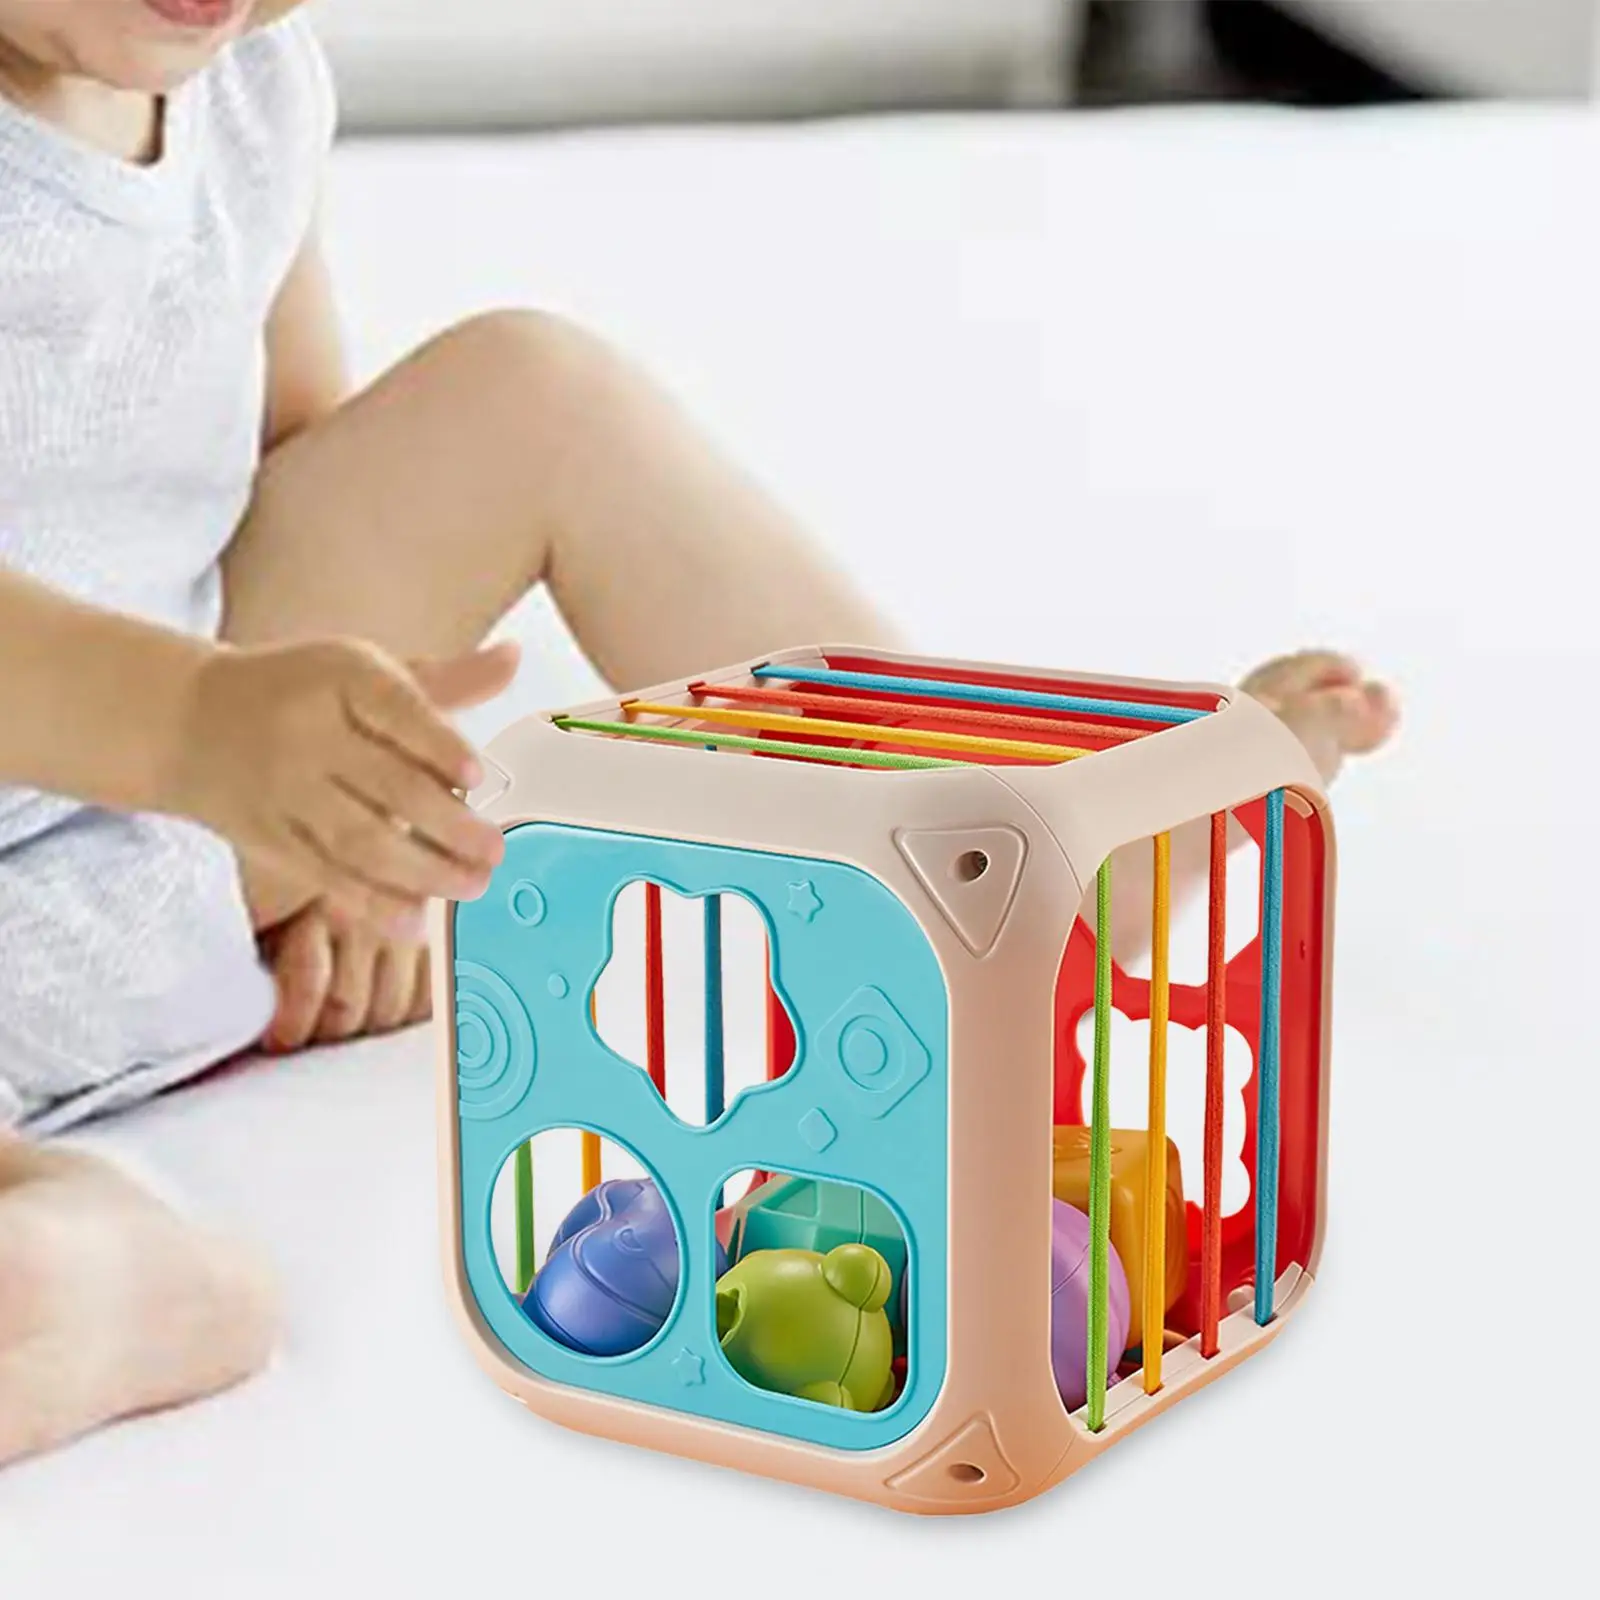 Montessori Sensory Bin Shape Sorter Toys Educational with Elastic Bands Matching for Birthday Gift Baby Kids Children Toddlers